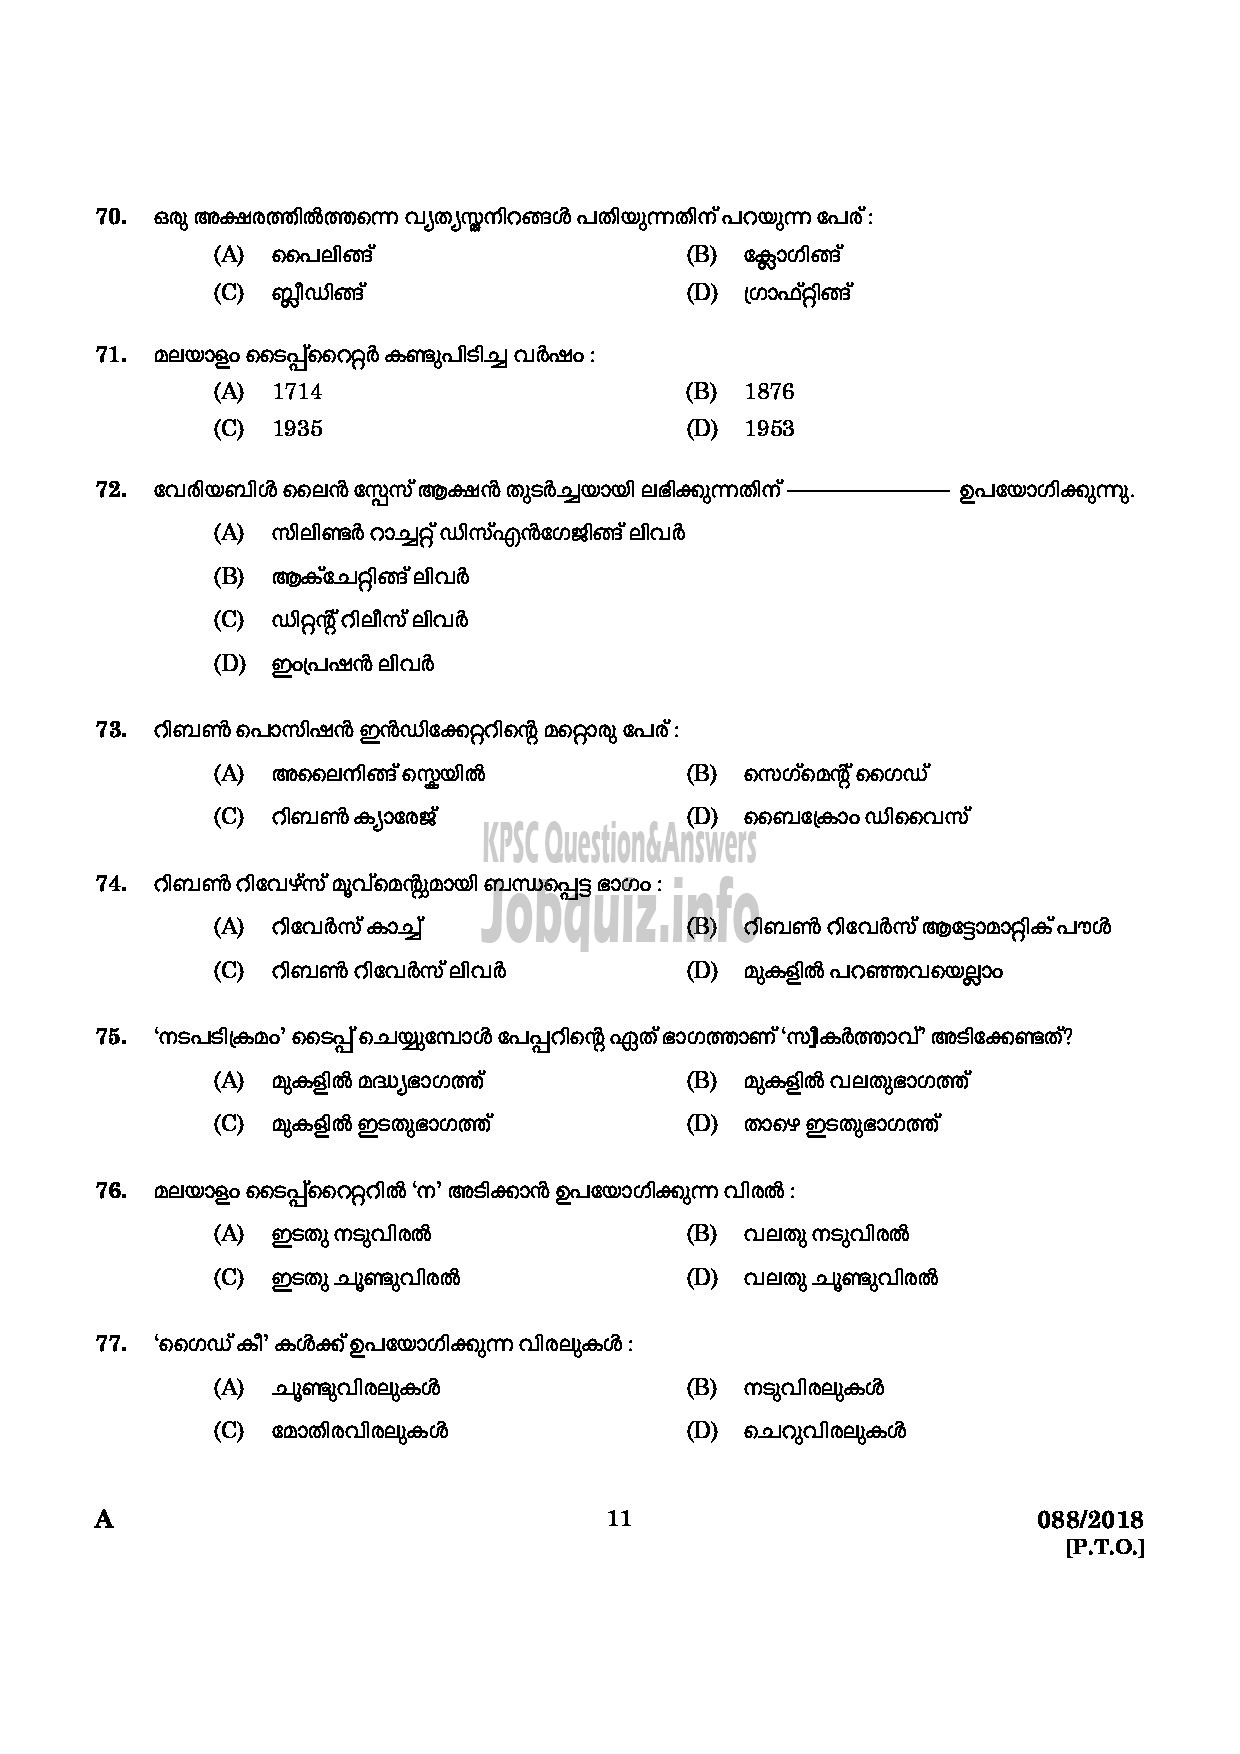 Kerala PSC Question Paper - REPORTER GR II MALAYALAM HEAD CONSTABLE GENERAL EXECUTIVE FORCE POLICE Malayalam-9